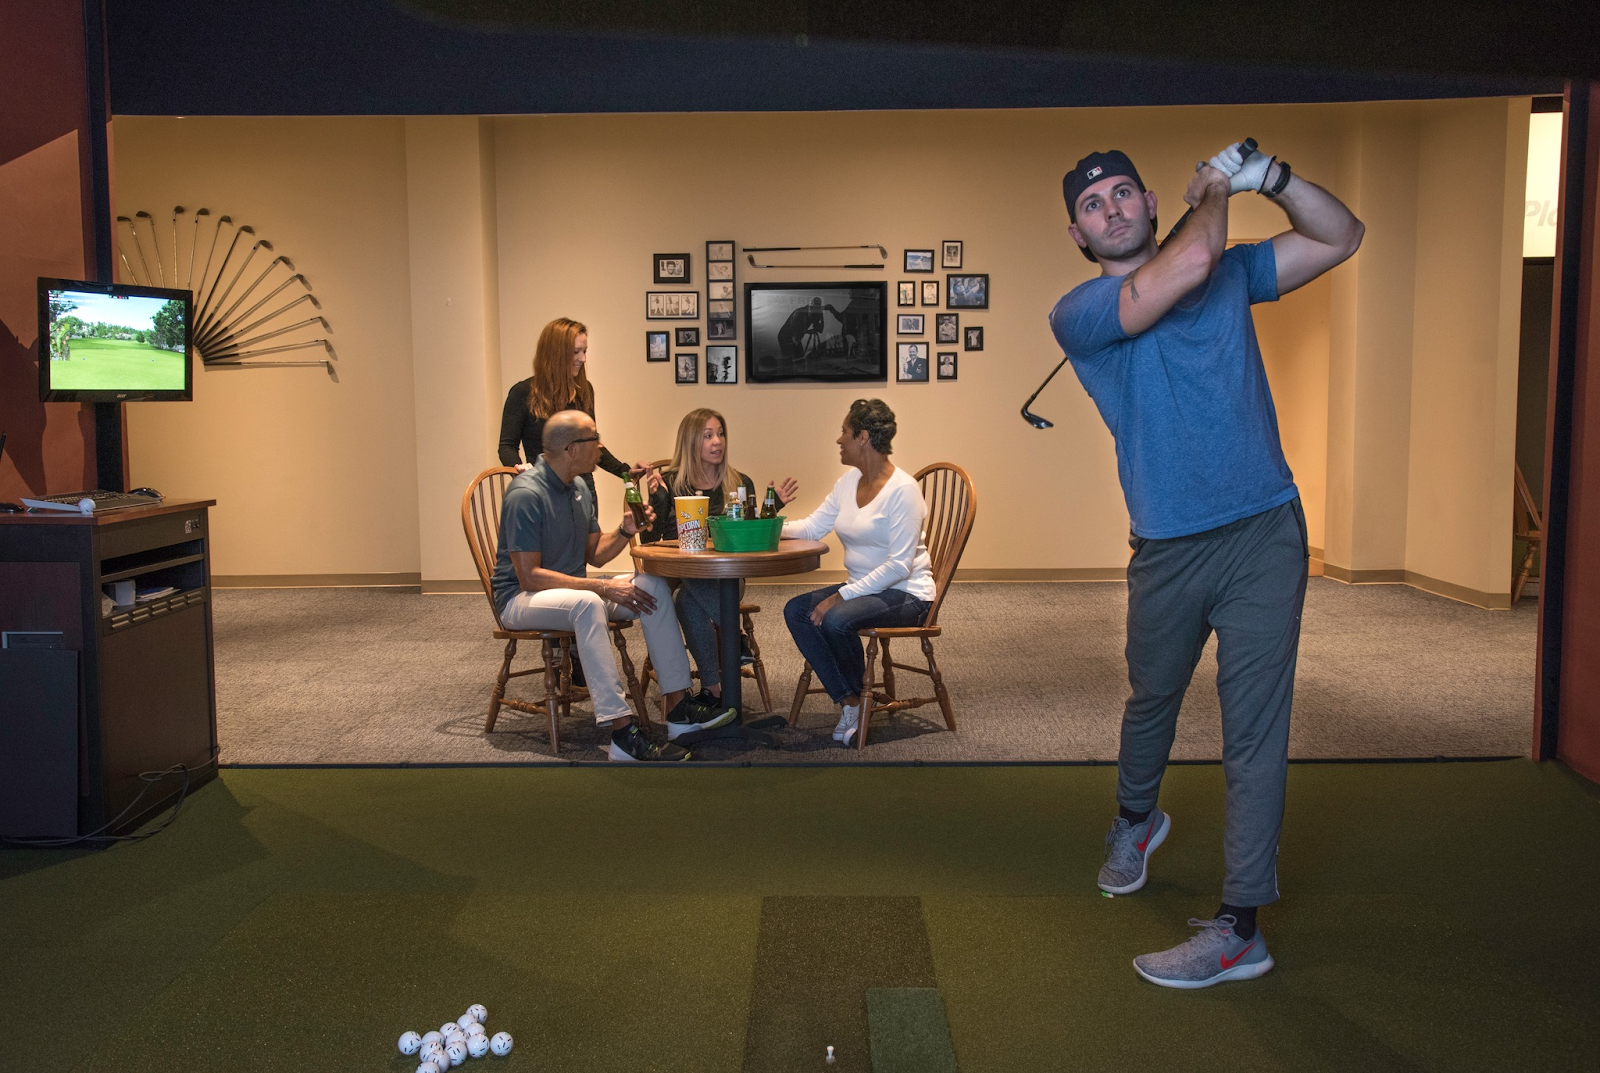 A golfer post swing in front of their group enjoying a round of virtual golf